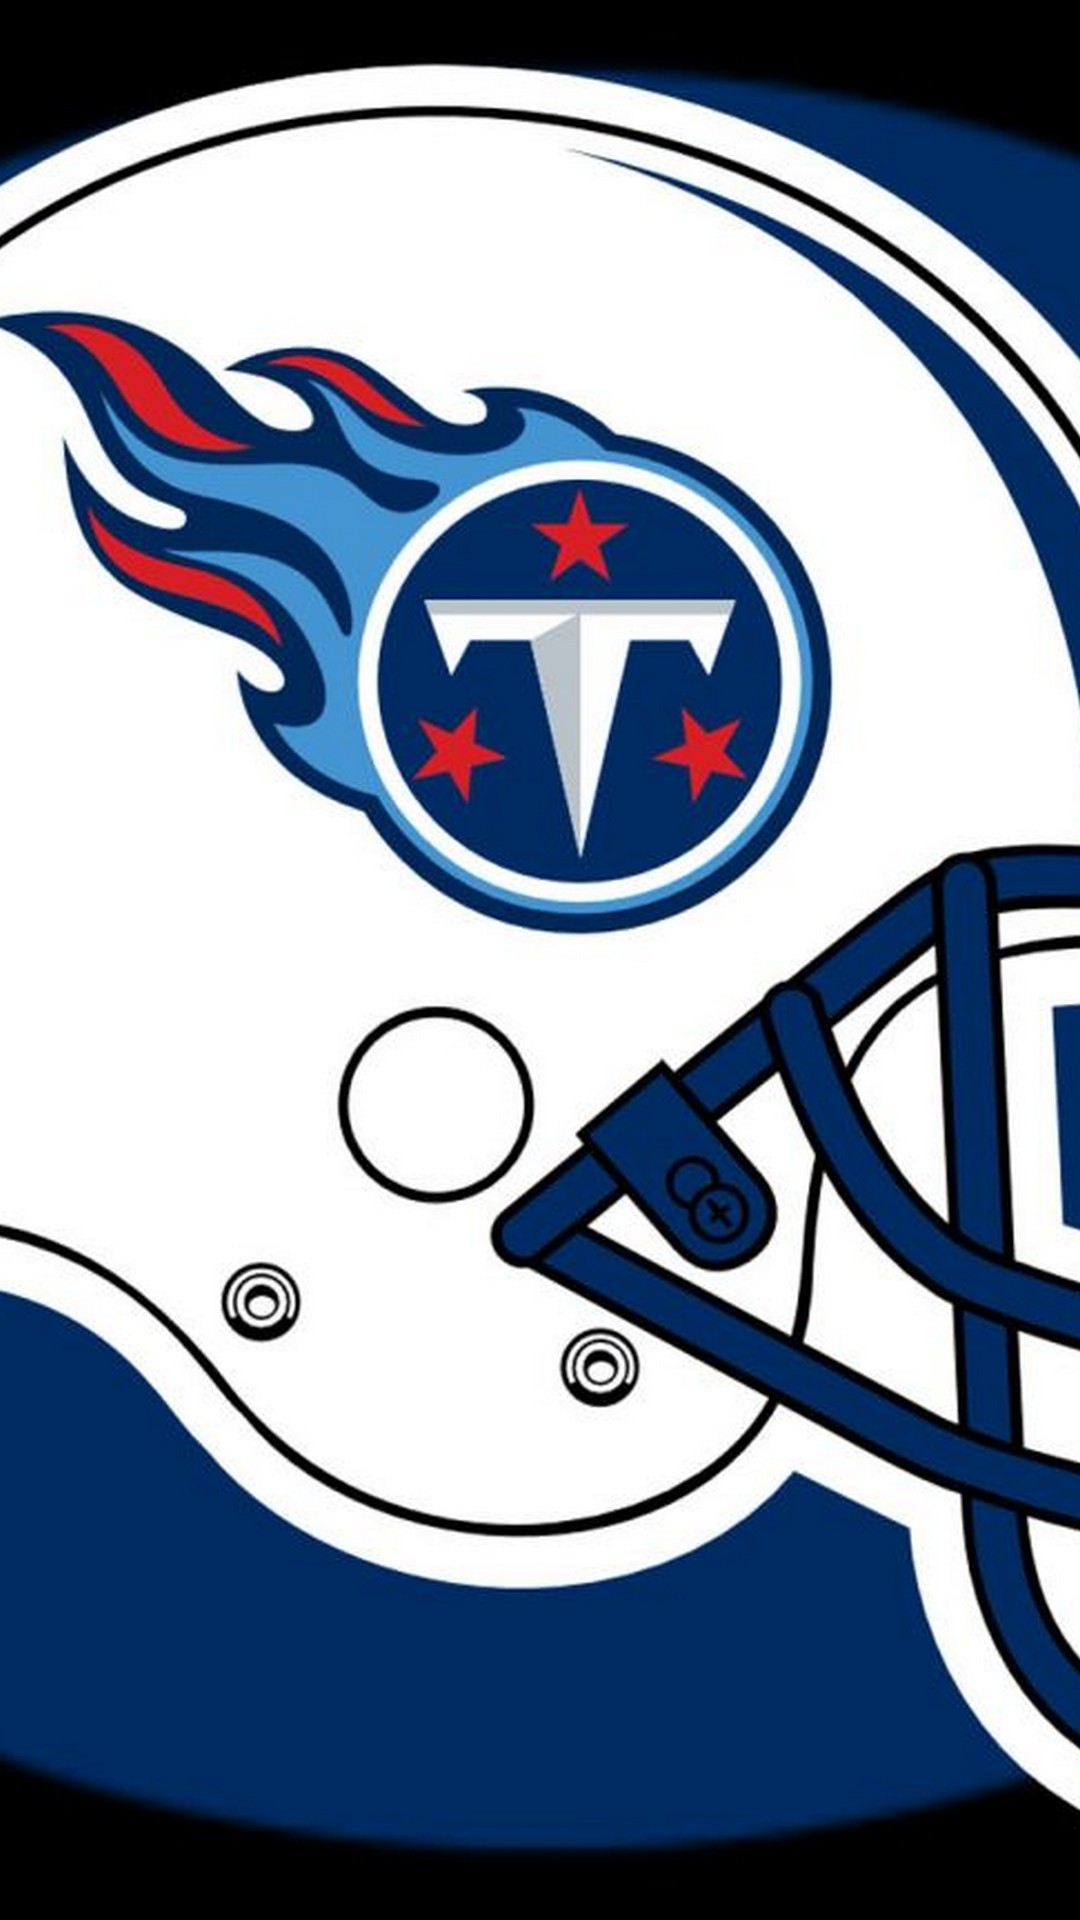 Tennessee Titans iPhone Wallpaper in HD With high-resolution 1080X1920 pixel. Download and set as wallpaper for Desktop Computer, Apple iPhone X, XS Max, XR, 8, 7, 6, SE, iPad, Android